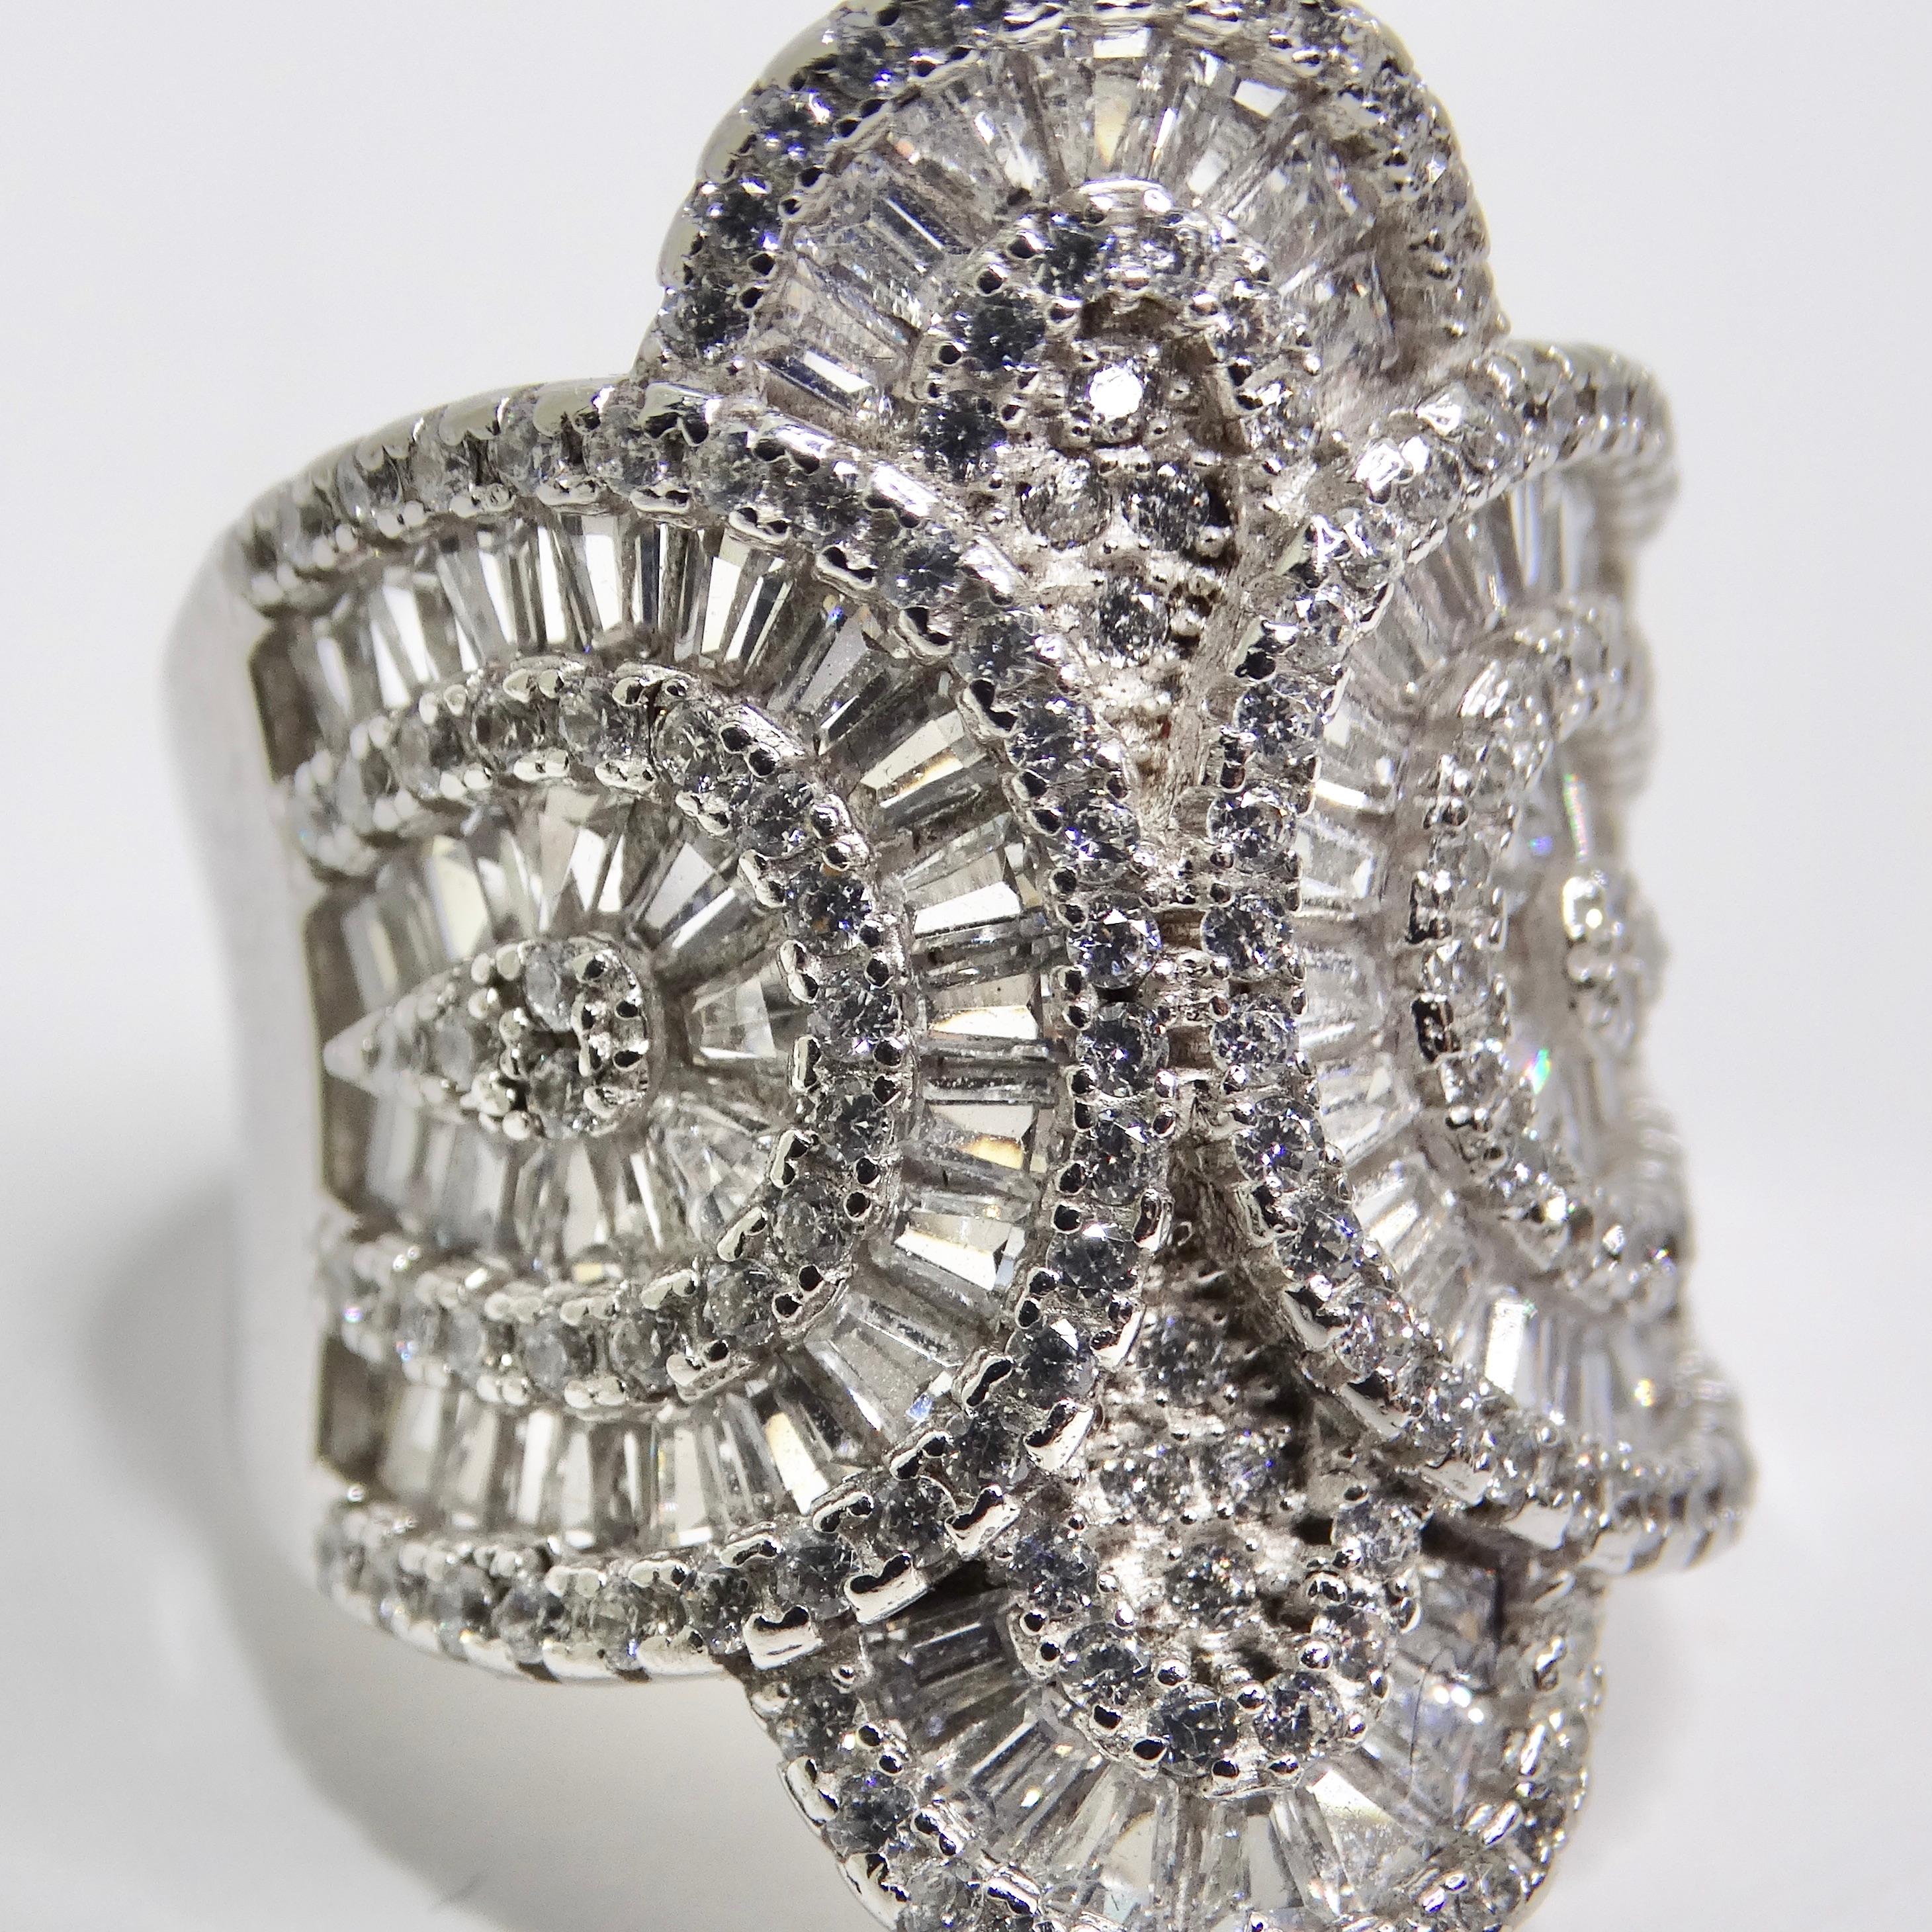 Elevate your style with our 1980s Swarovski Crystal Silver Cocktail Ring, a glamorous and dramatic piece that celebrates the beauty and sparkle of Swarovski crystals. This eye-catching ring is a true masterpiece, crafted from 925 sterling silver and